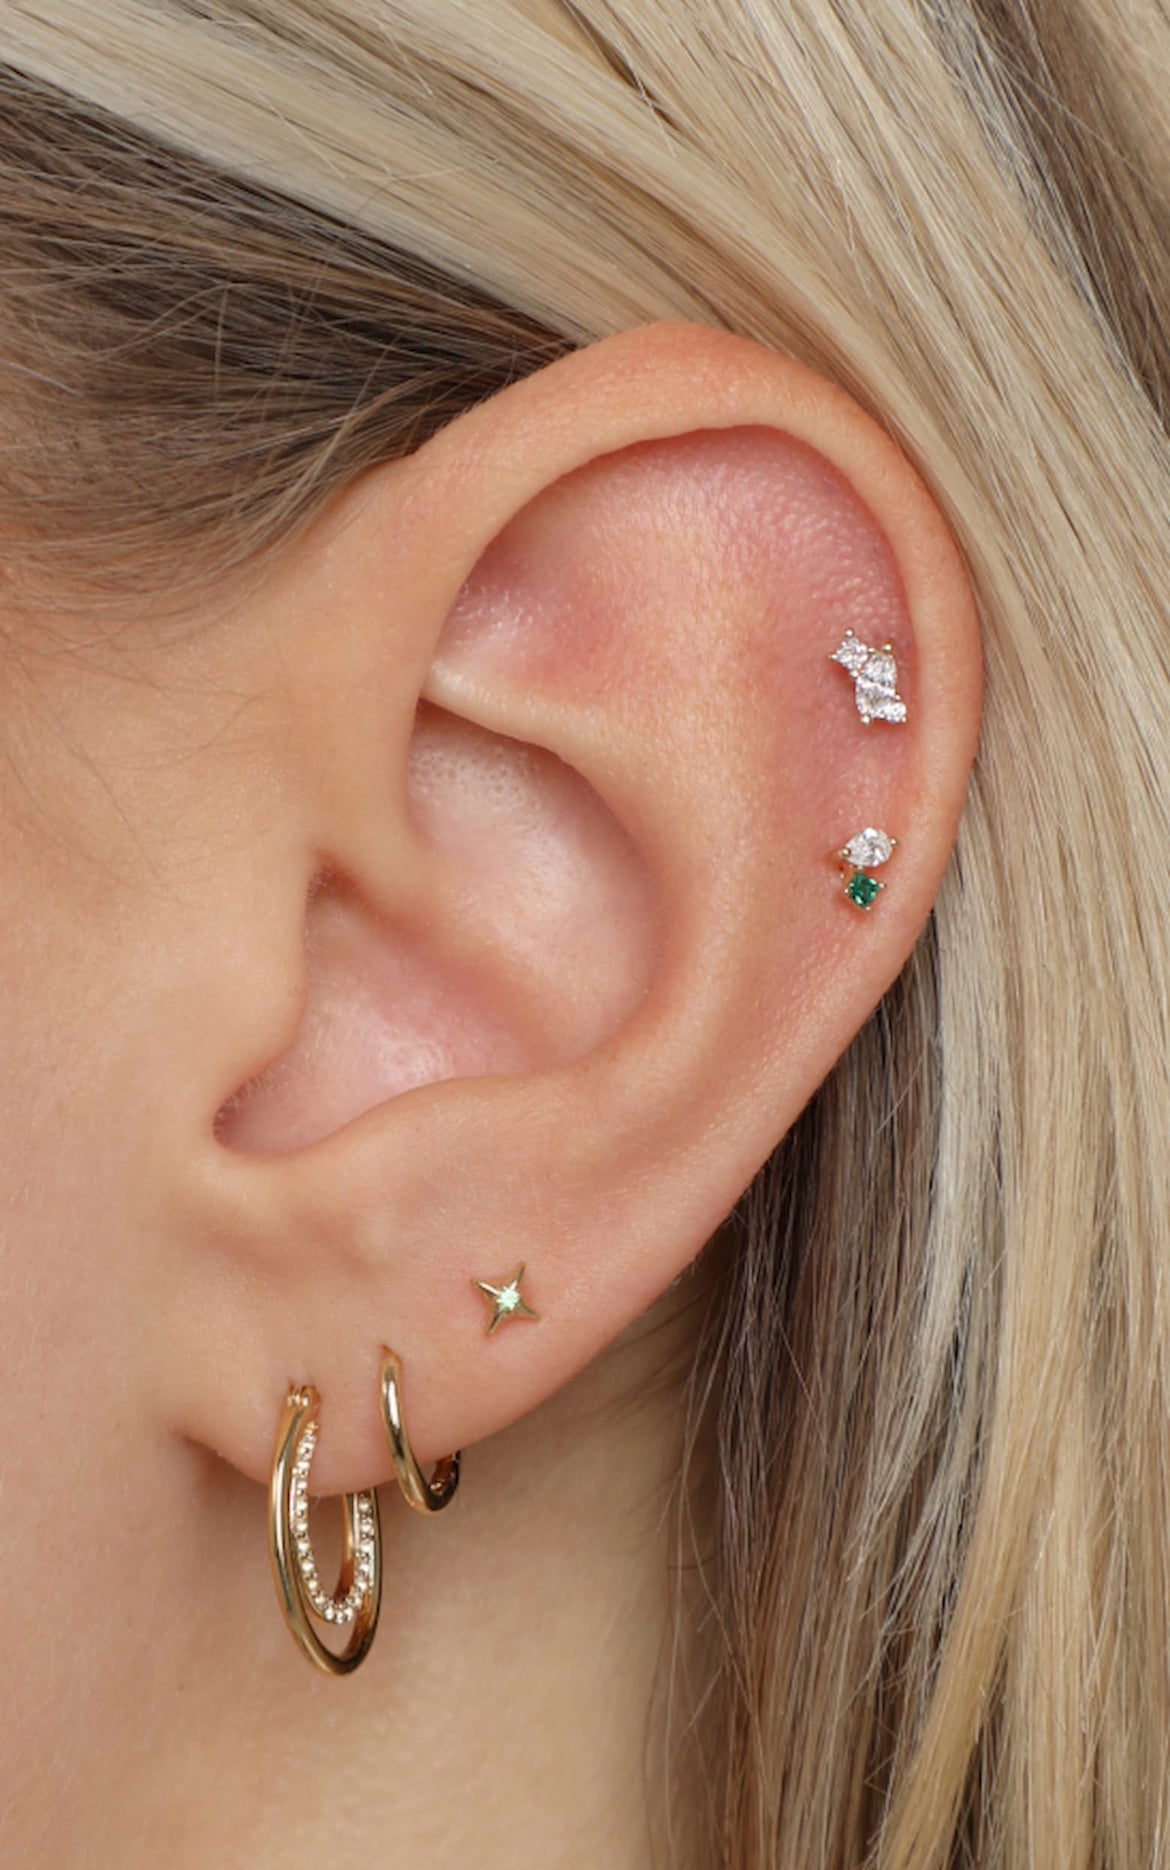 Studs NYC Ear Piercing Studio Review, Pricing Jewelry